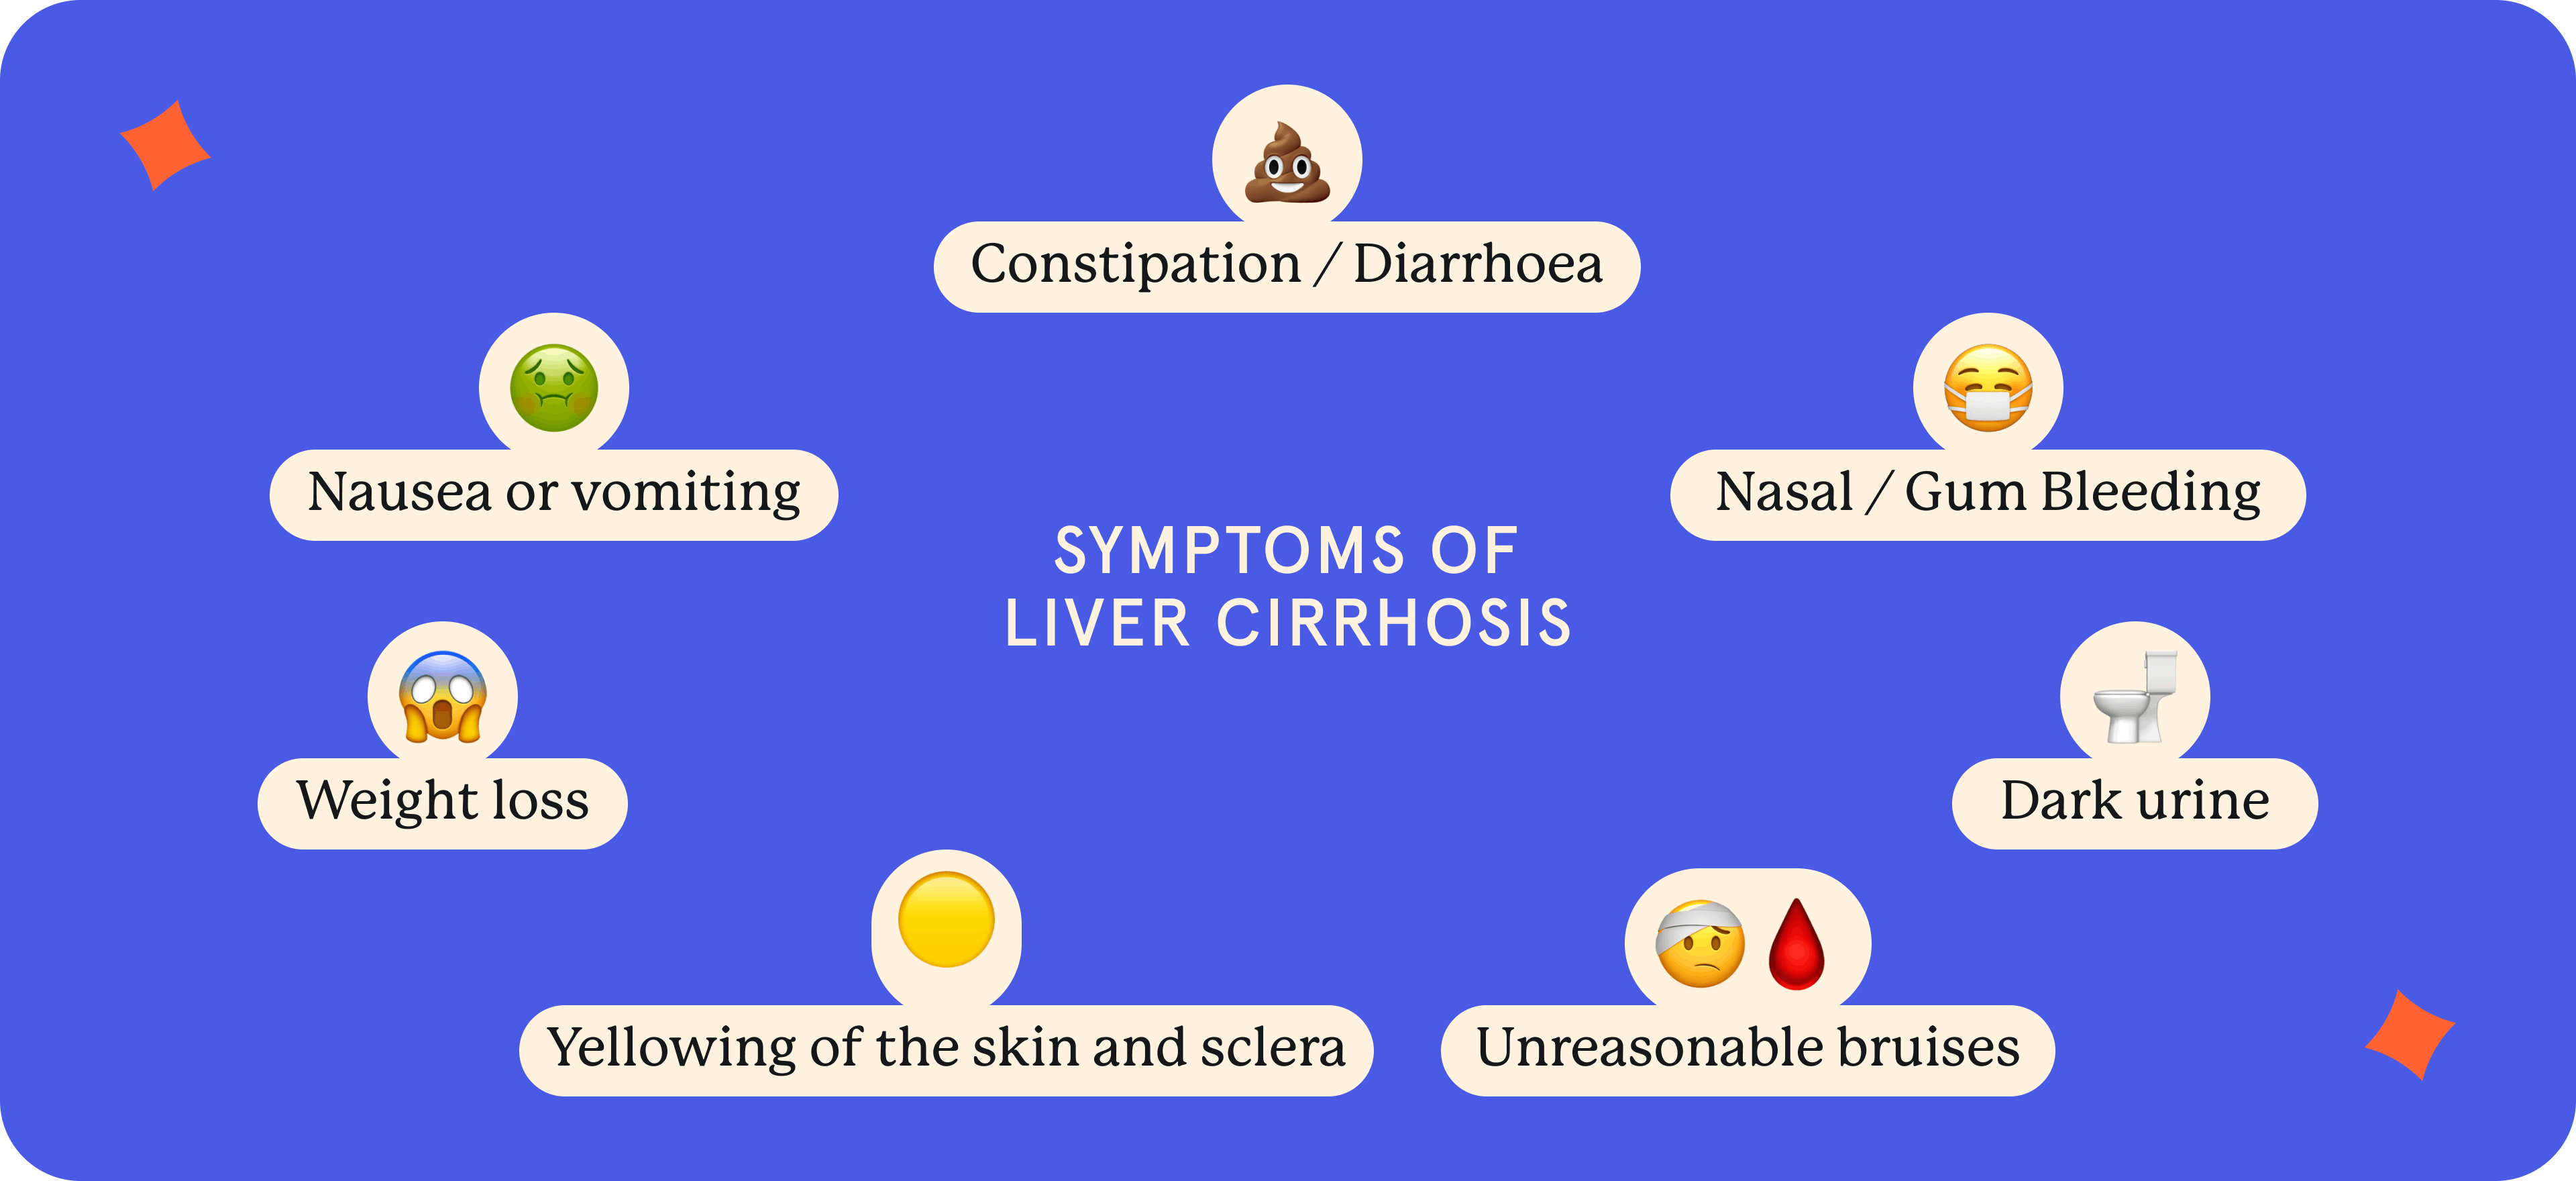 A picture representing the Symptoms of Liver Cirrhosis